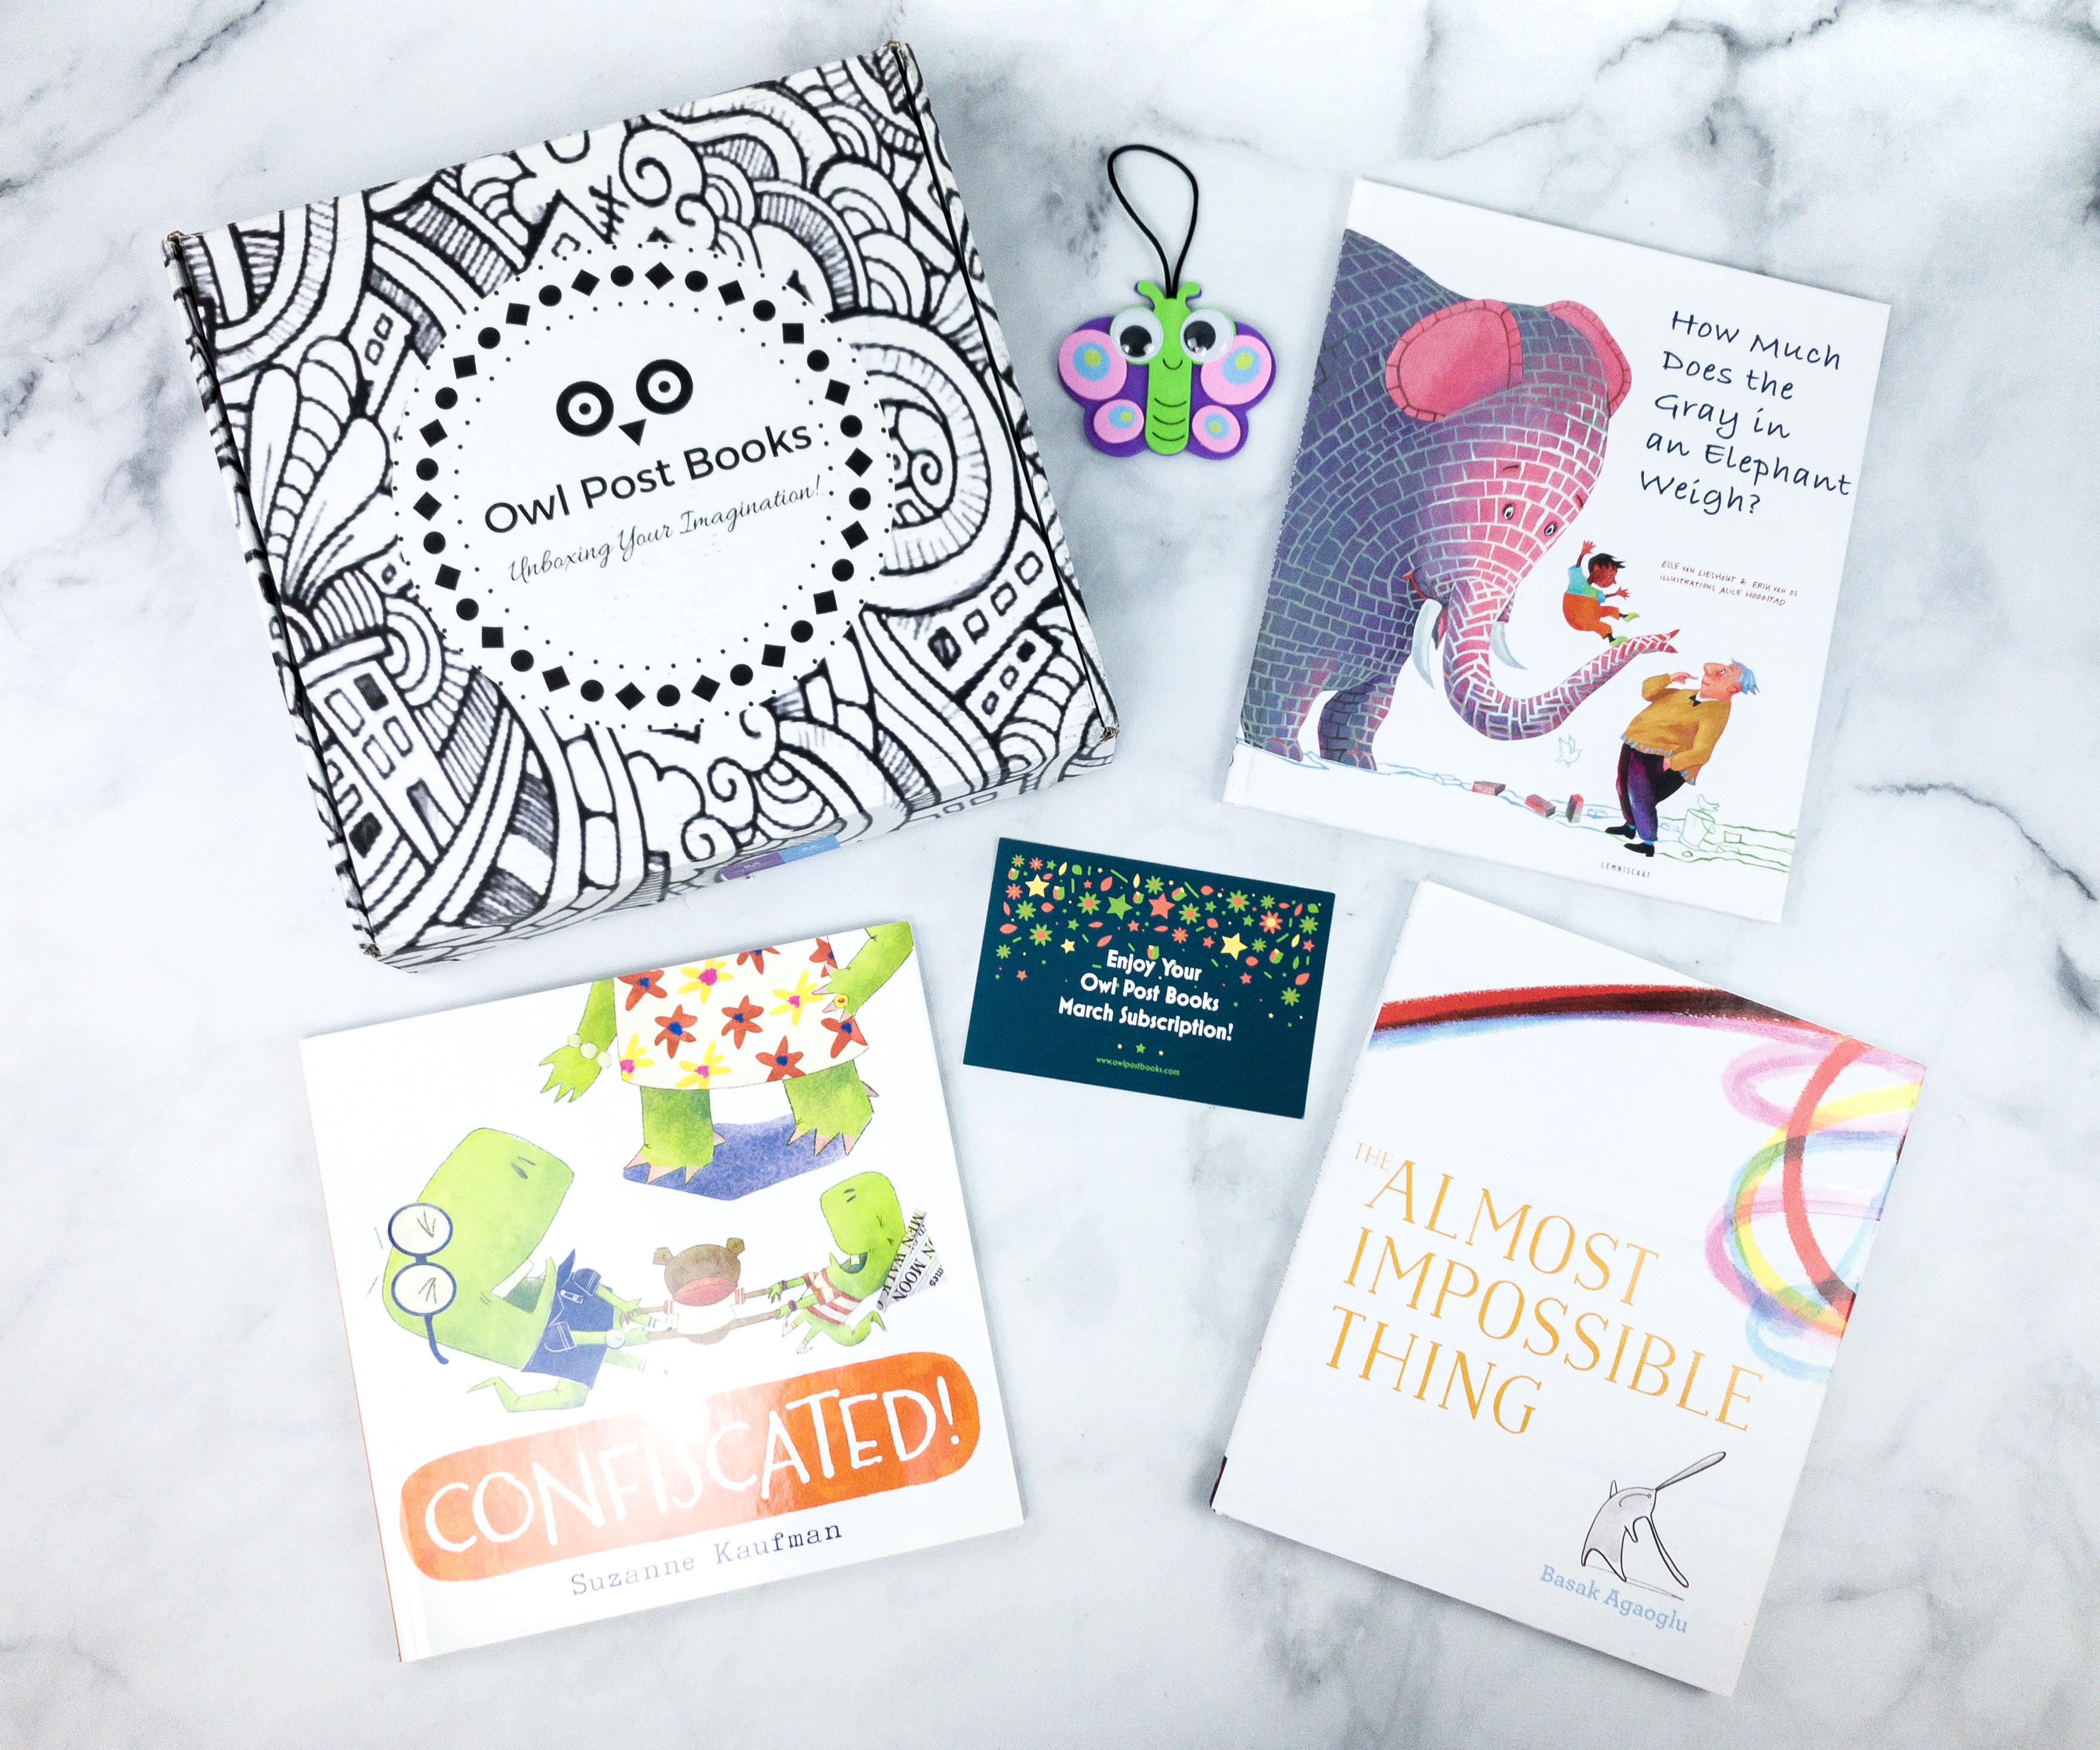 Owl Post Books is a monthly children's book subscription that ships brand new children's books right to your front door.